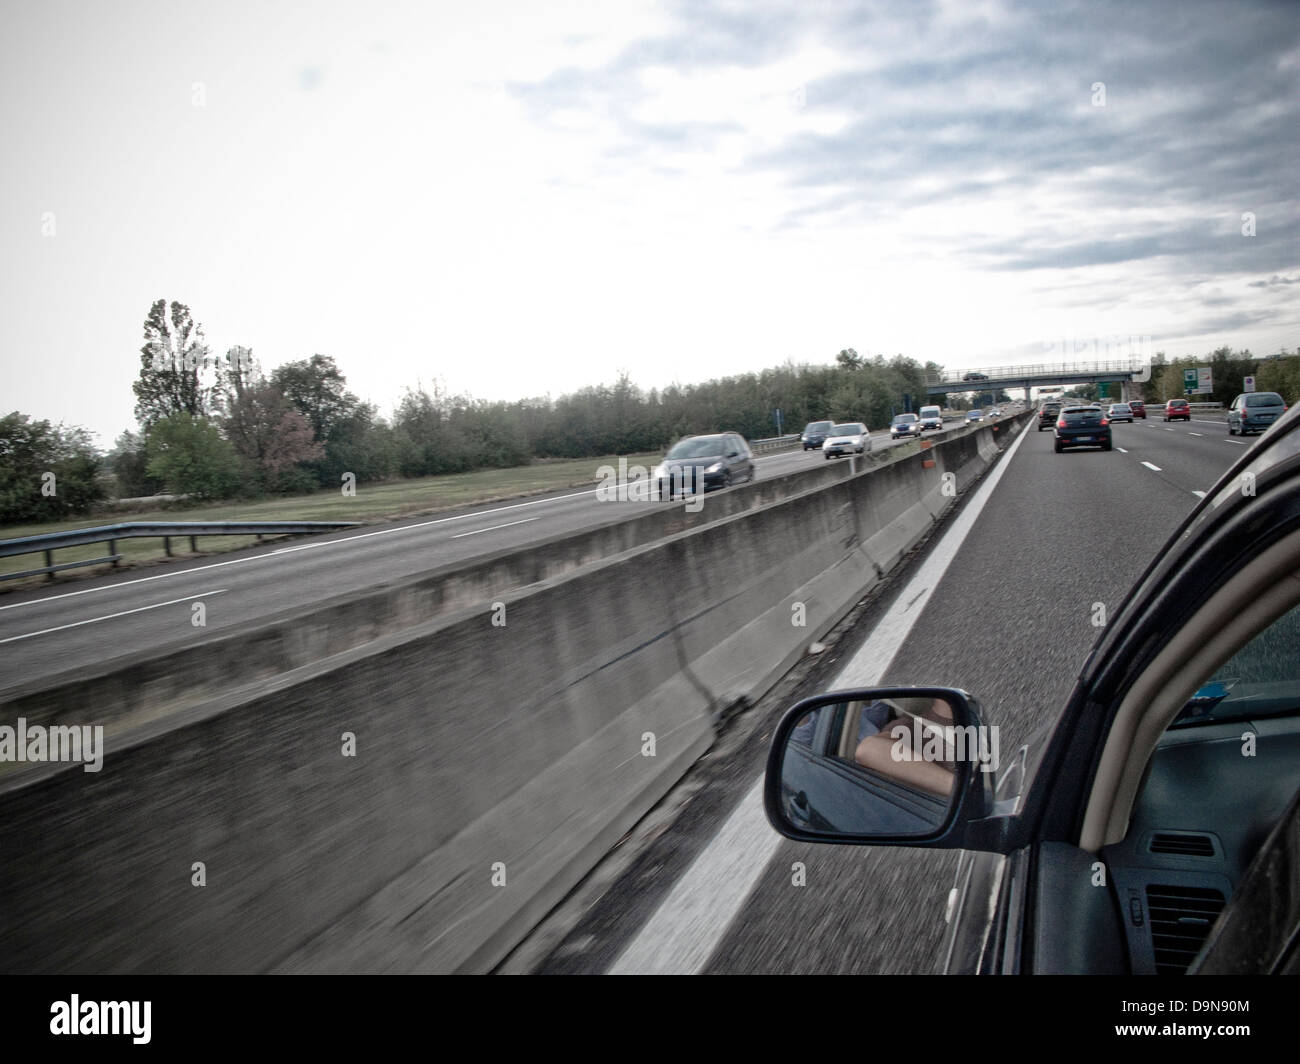 rearview mirror of a car on the highway Stock Photo